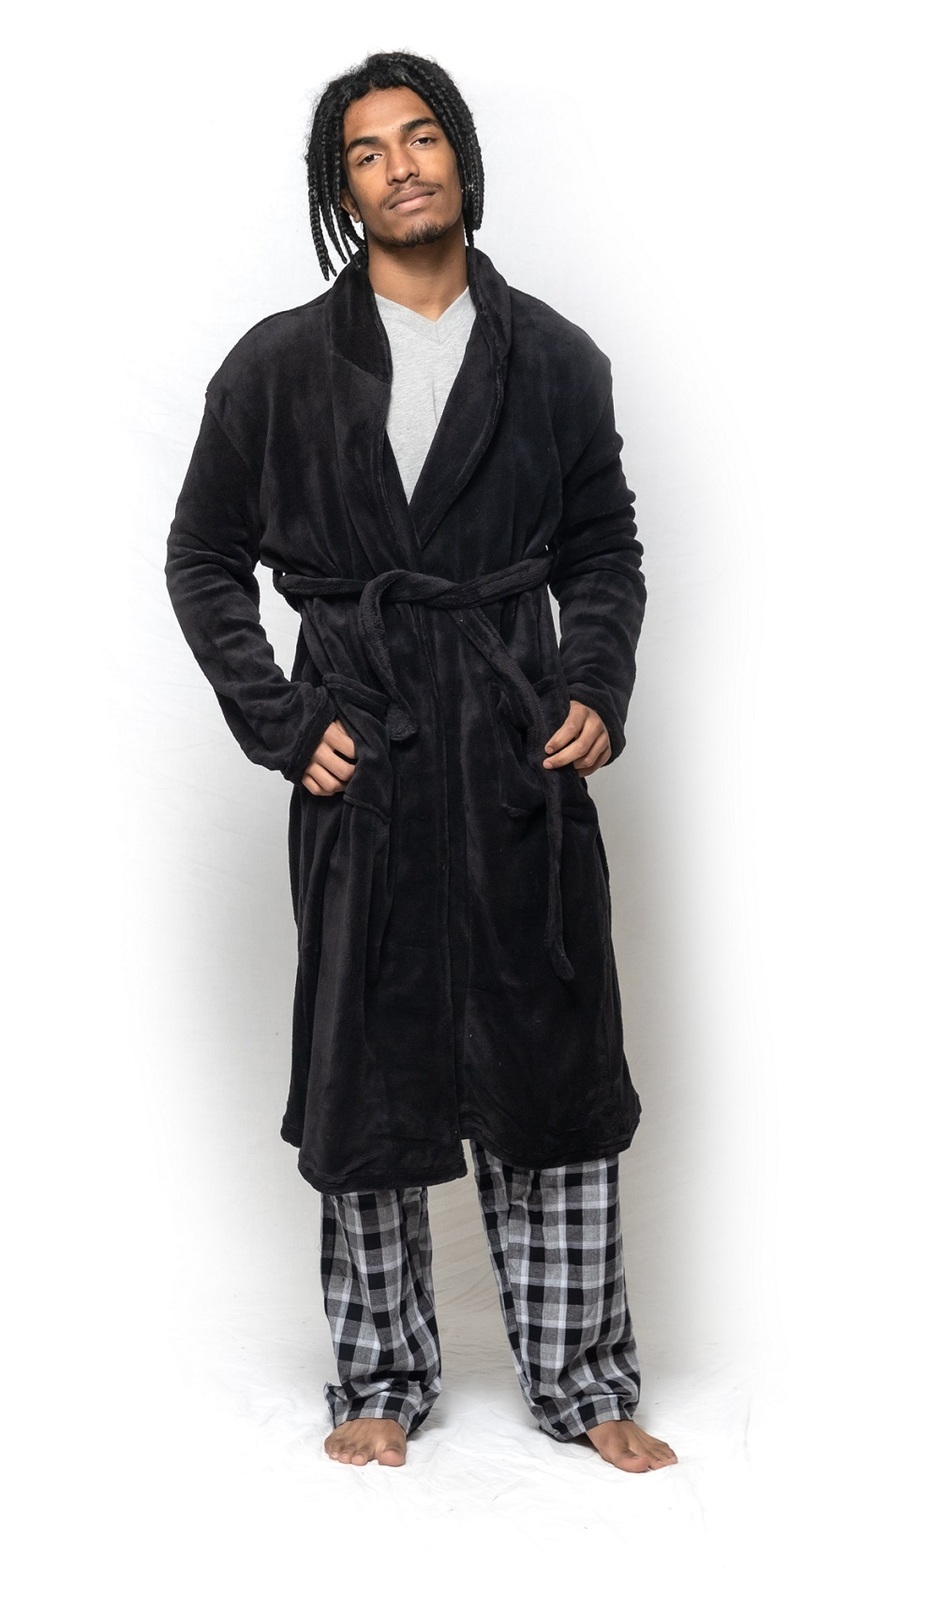 Manchester United F.C. Dressing Gown for Men, Mens Fleece Robe, Football  Gifts (Black, M) : Amazon.co.uk: Fashion